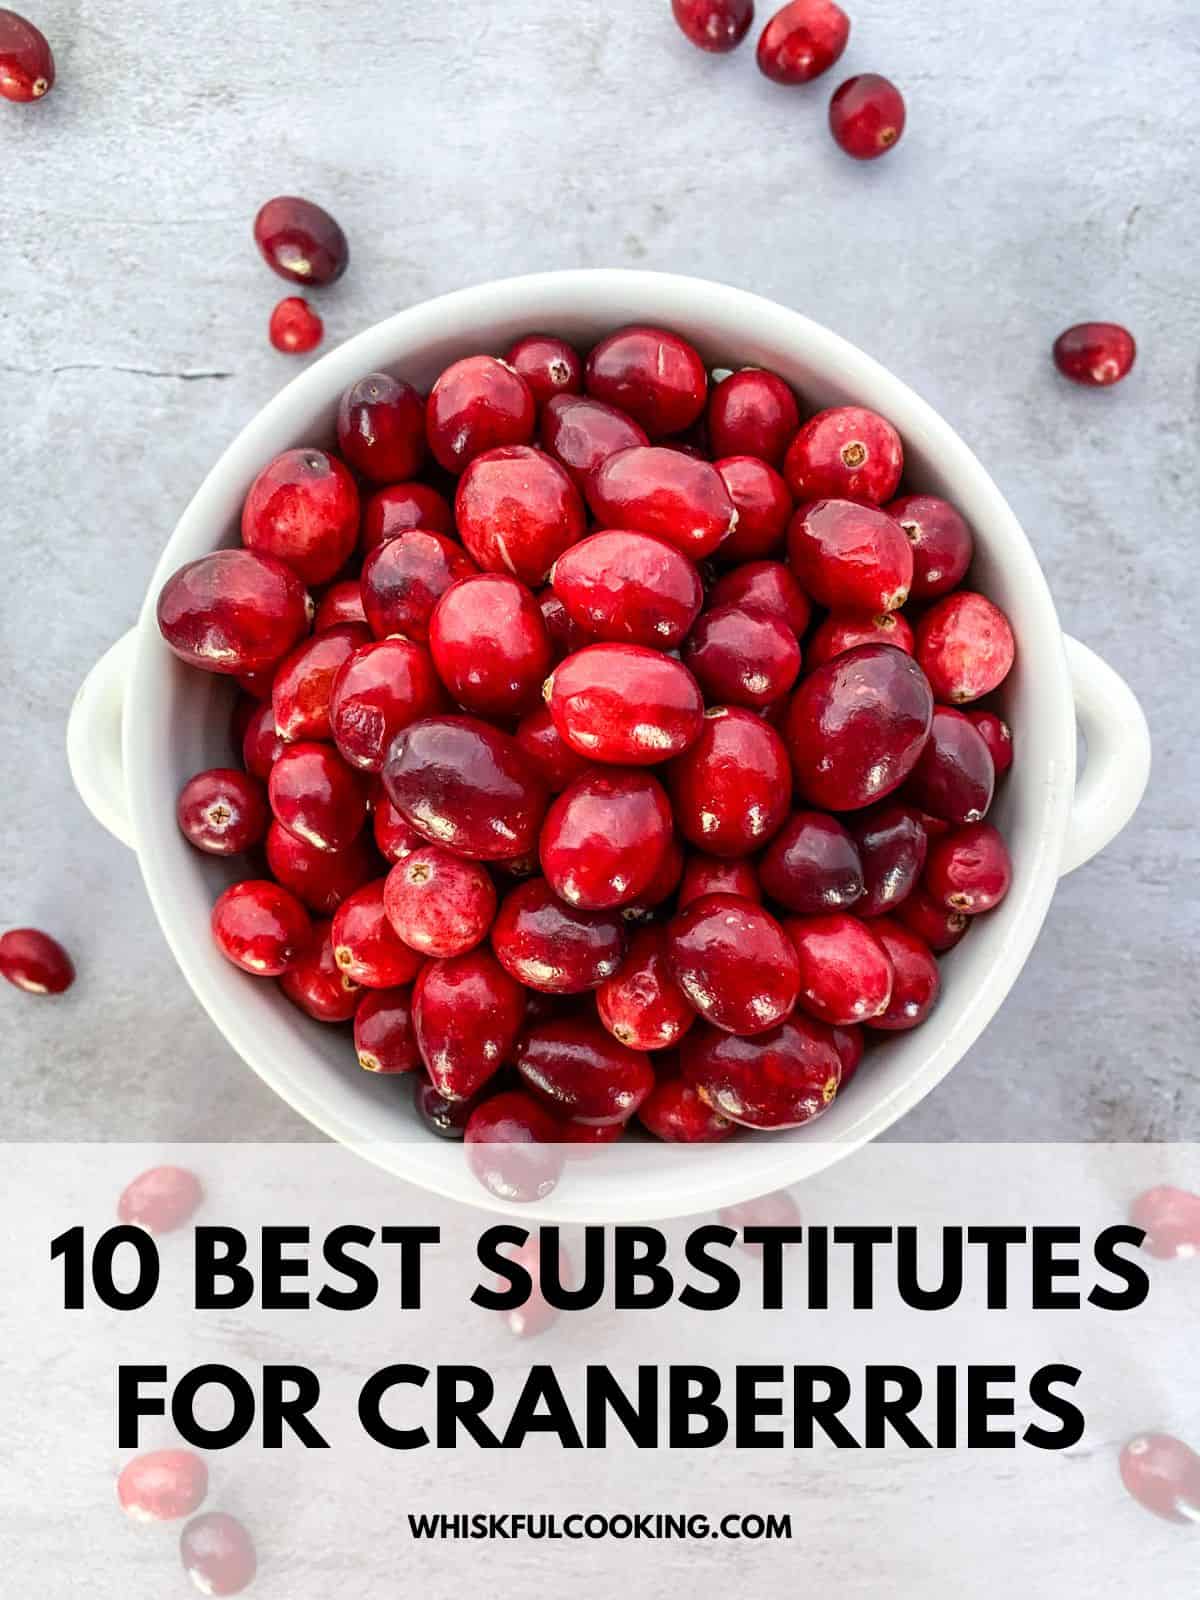 a bowl of cranberries and font over top that states 10 best substitutes for cranberries